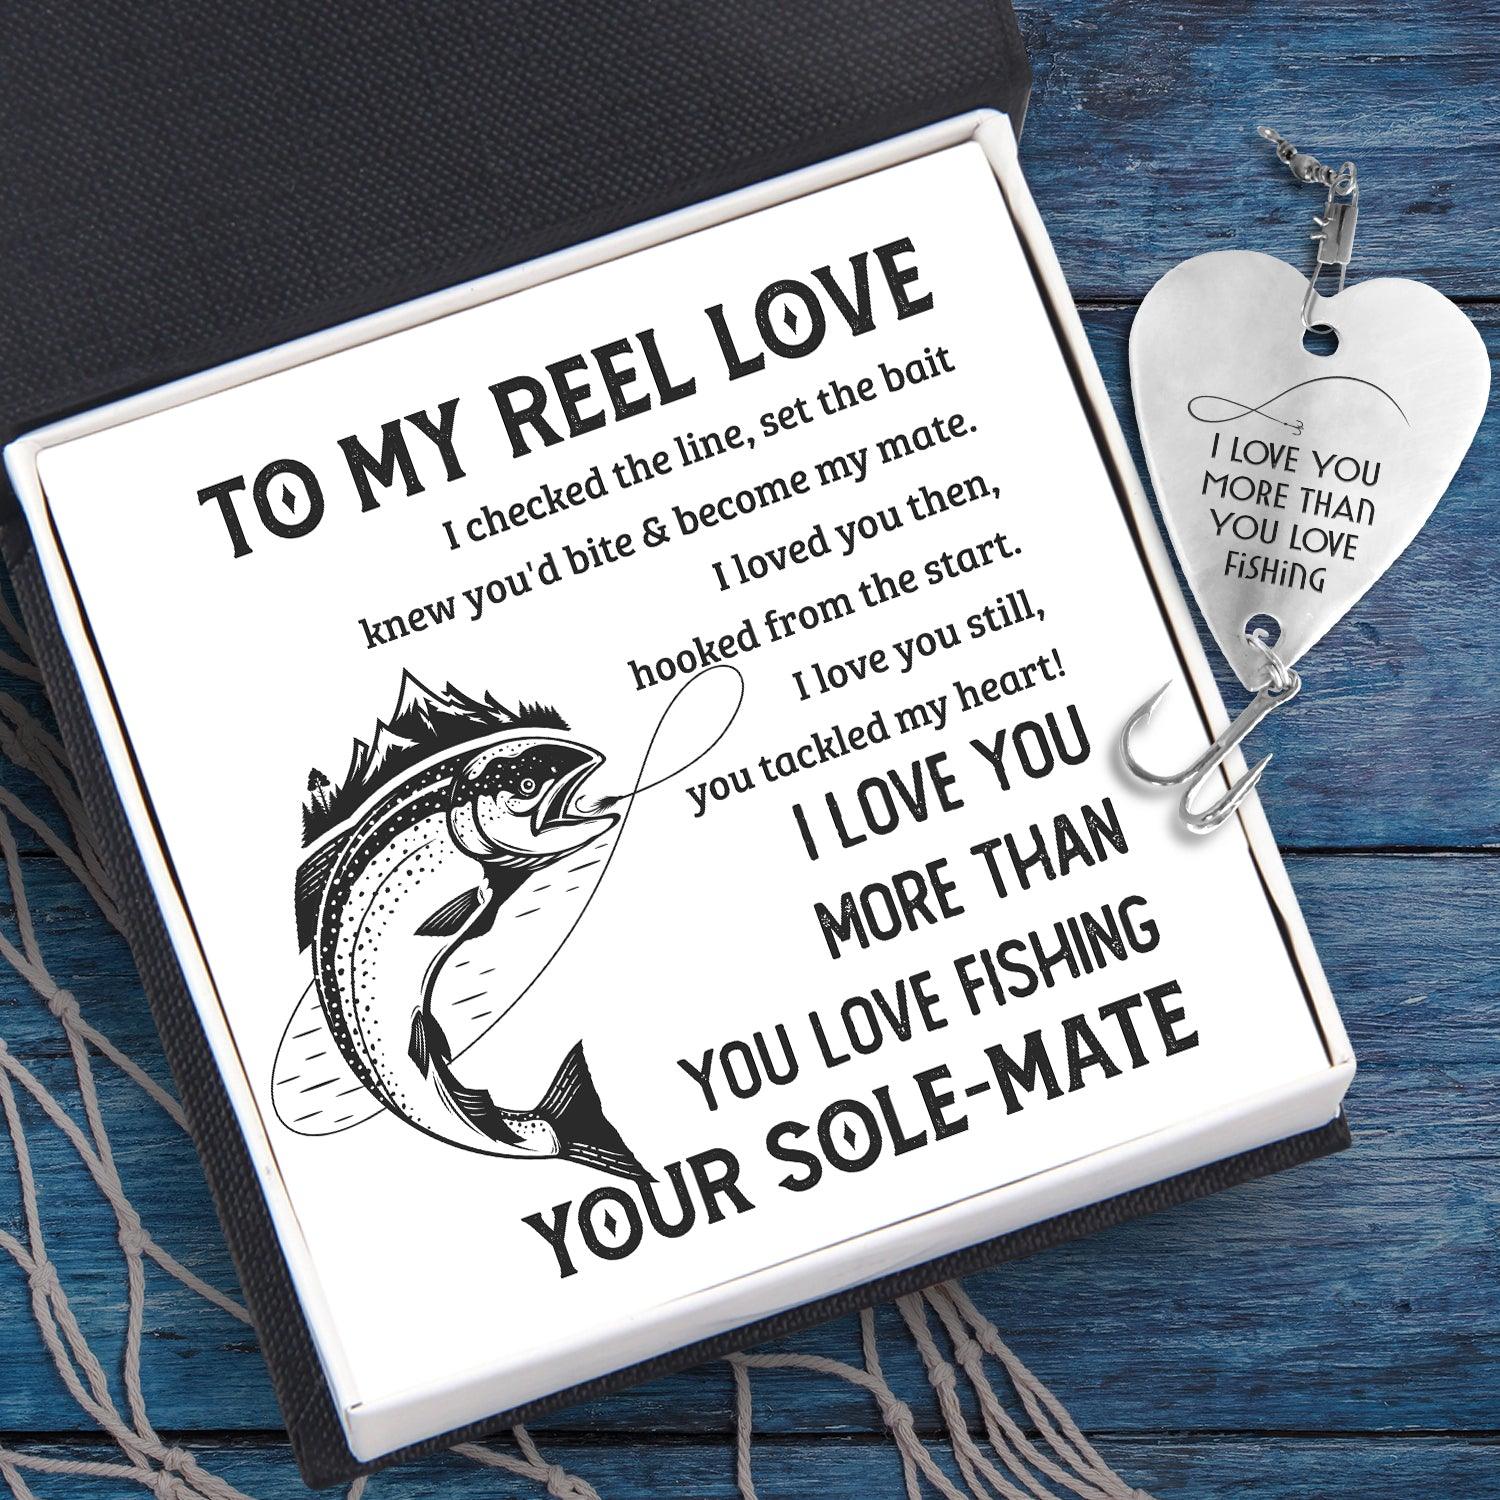 Heart Fishing Lure - Fishing - To My Reel Love - I Love You More Than You Love Fishing - Augfc13005 - Gifts Holder